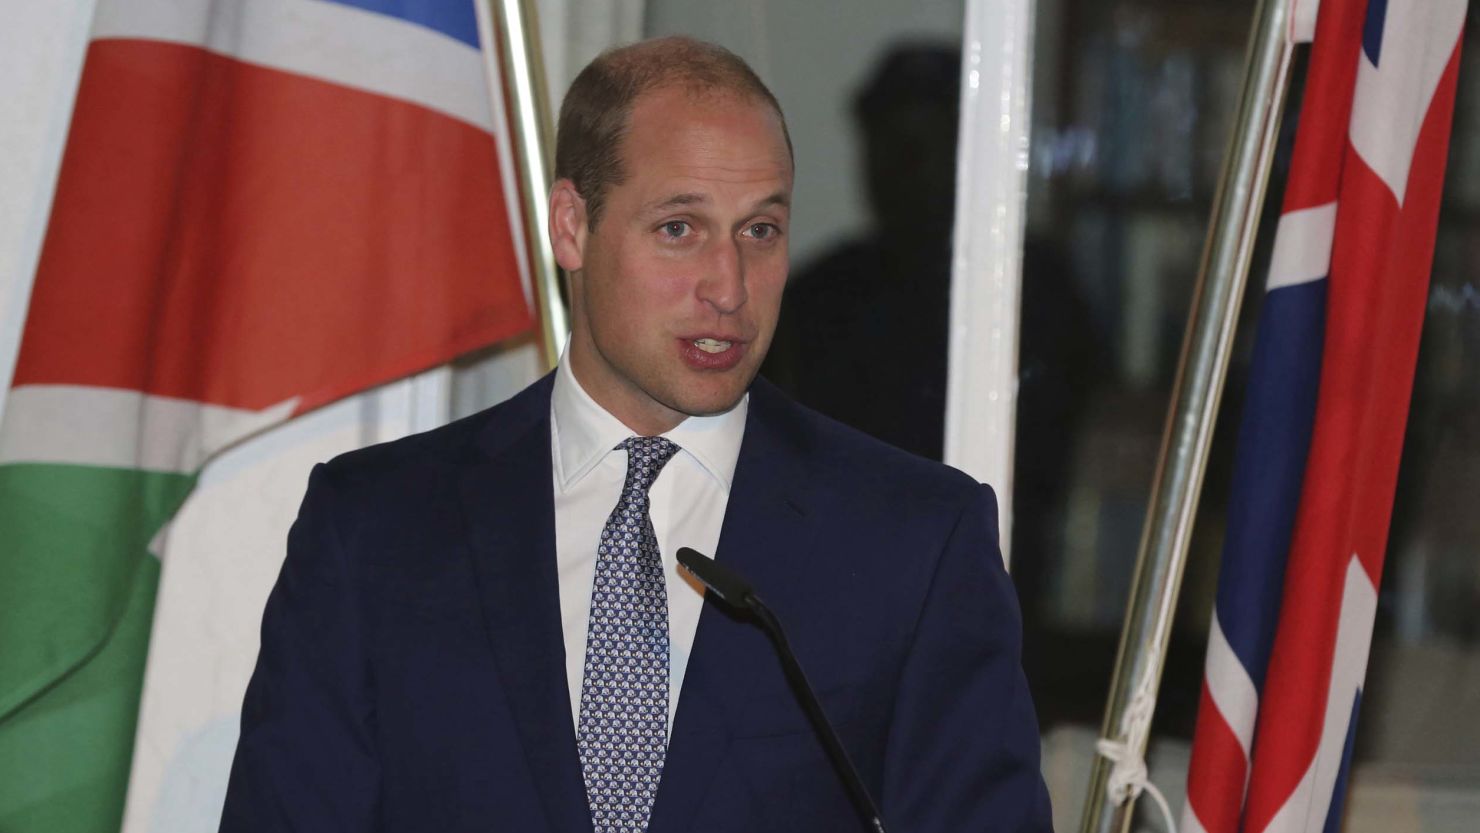 Britain's Prince William, addresses guests at the British High Commissioner residence in Windhoek, Namibia, Tuesday, Sept. 25, 2018. Prince William is in Africa this week to discuss threats to conservation ahead of a London conference on the illegal wildlife trade. (AP Photo/Dirk Heinrich)